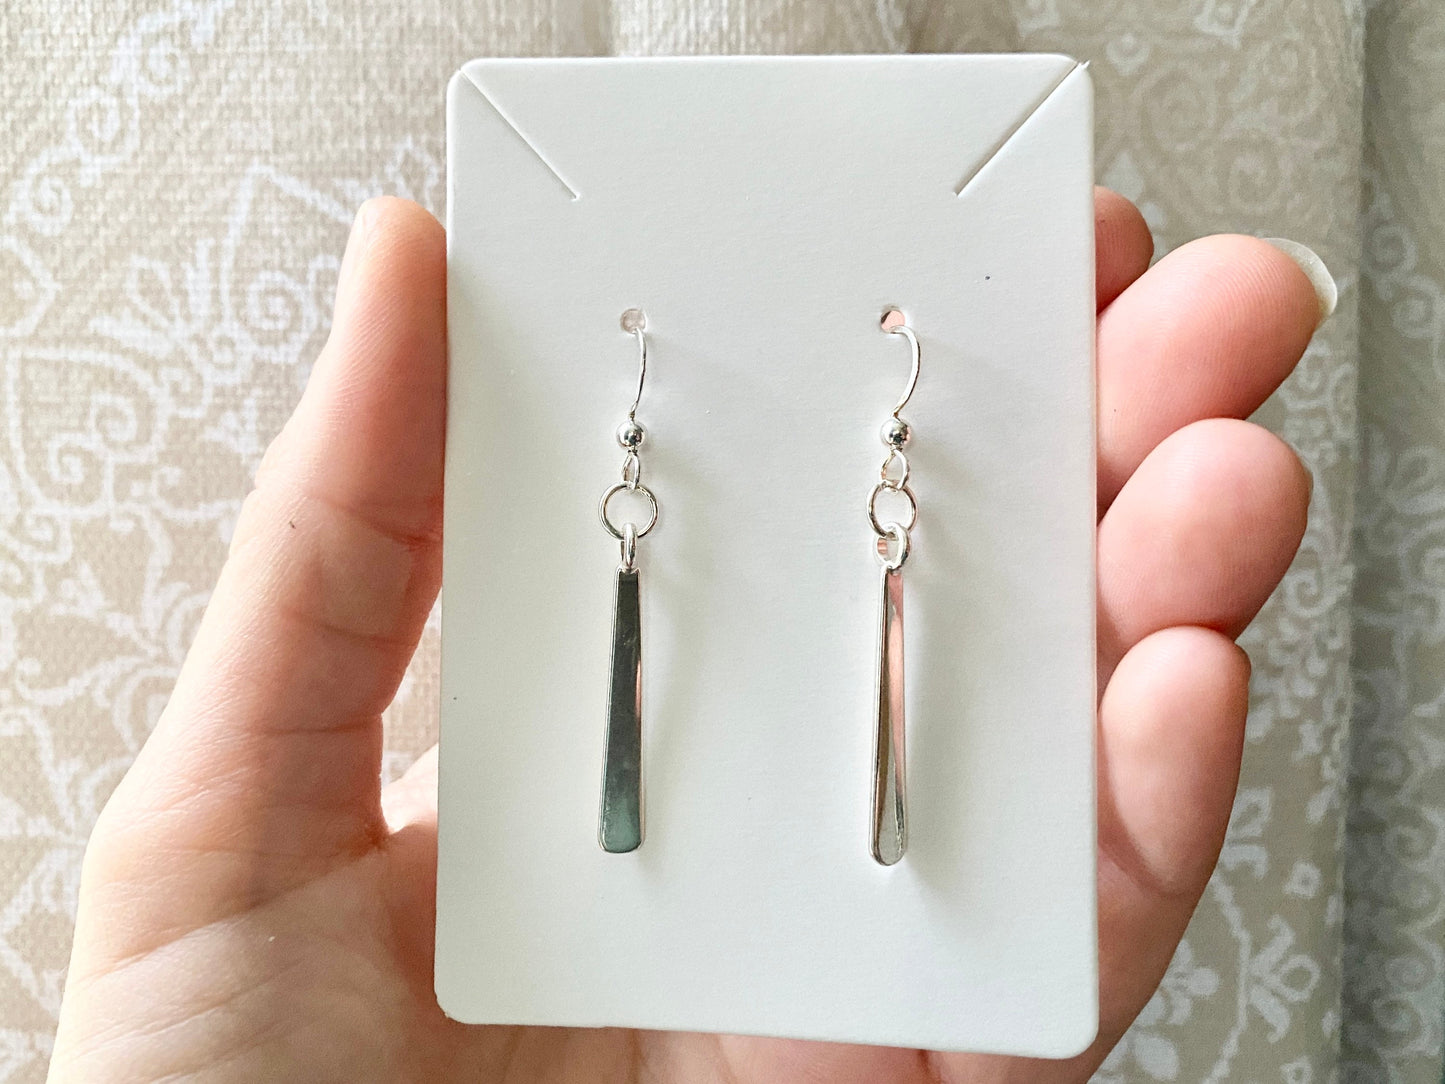 Simple Silver Bar Earrings in Sterling Silver - Dress up or down